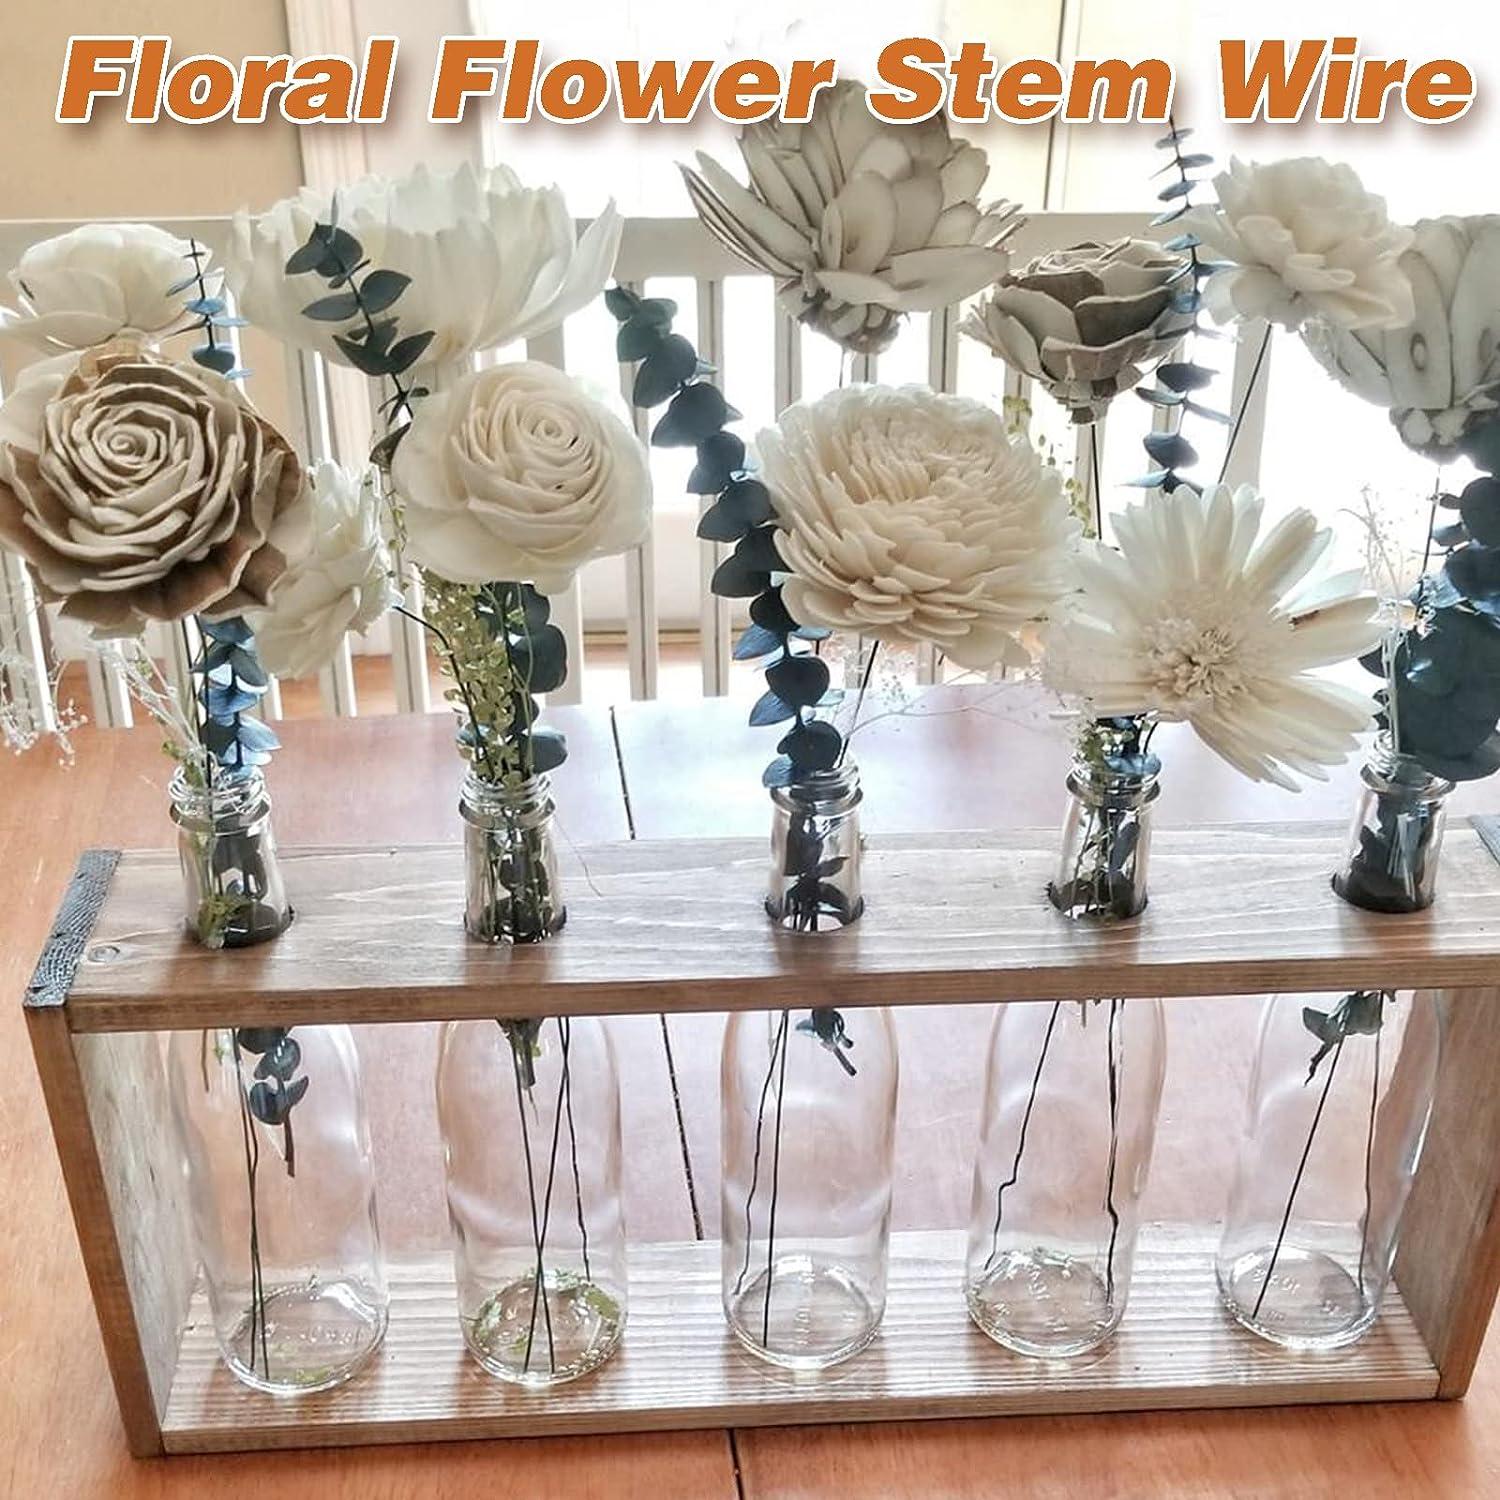 300 Pieces White 22 Gauge Floral Wire Stems for DIY Crafts, Artificial  Flower Arrangements (16 In)